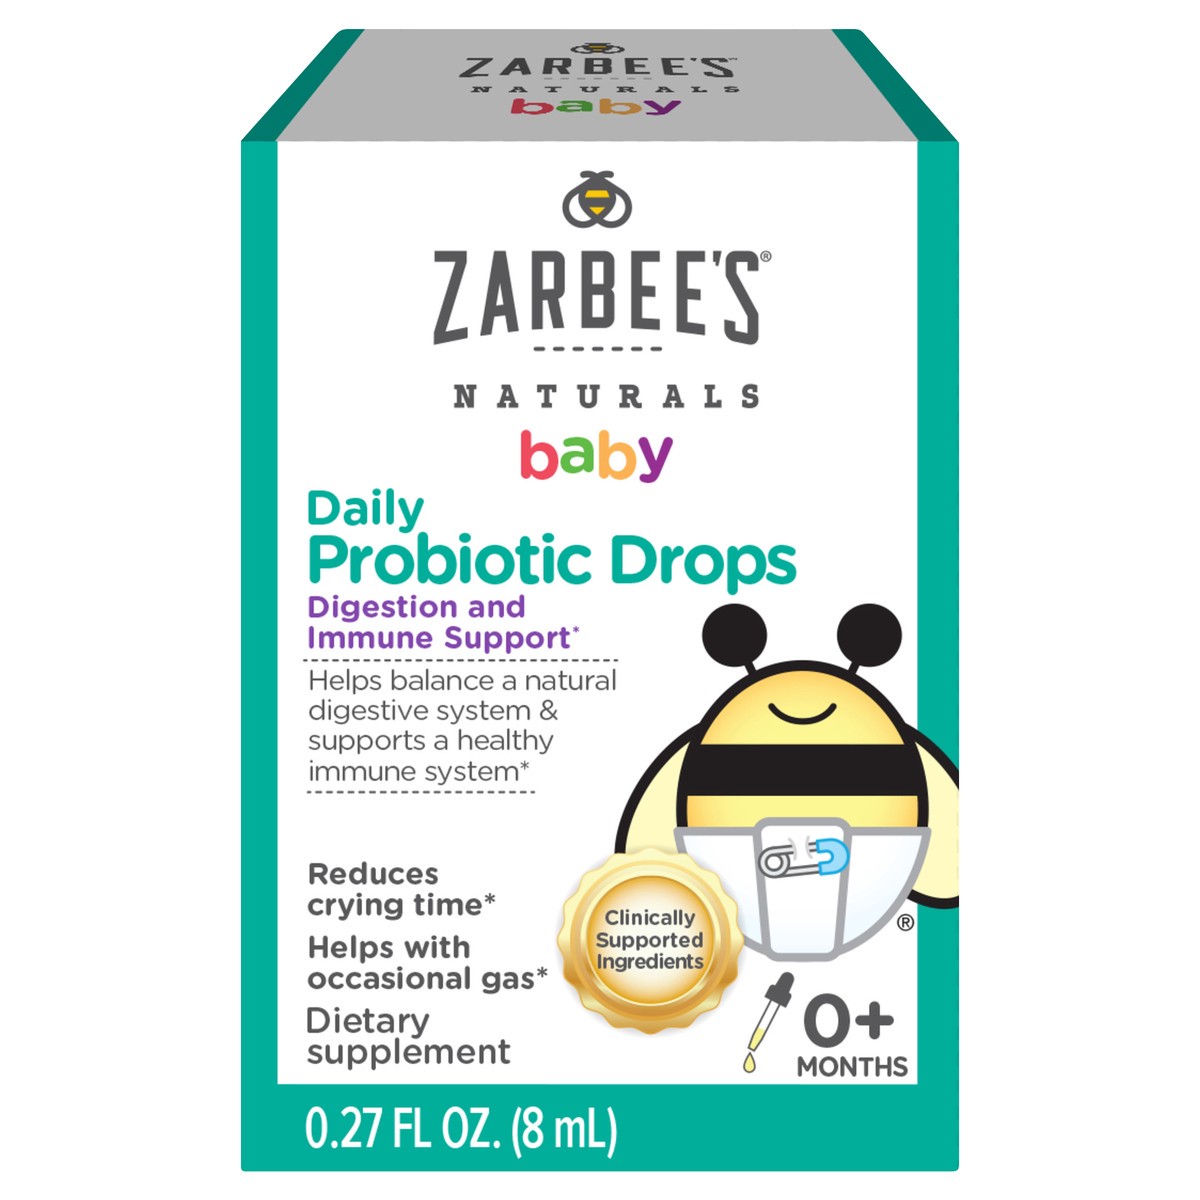 slide 1 of 5, Zarbee's Naturals Baby Daily Probiotic Drops, Digestion and Immune Support* Supplement, 0.27 fl oz, 0.27 fl oz